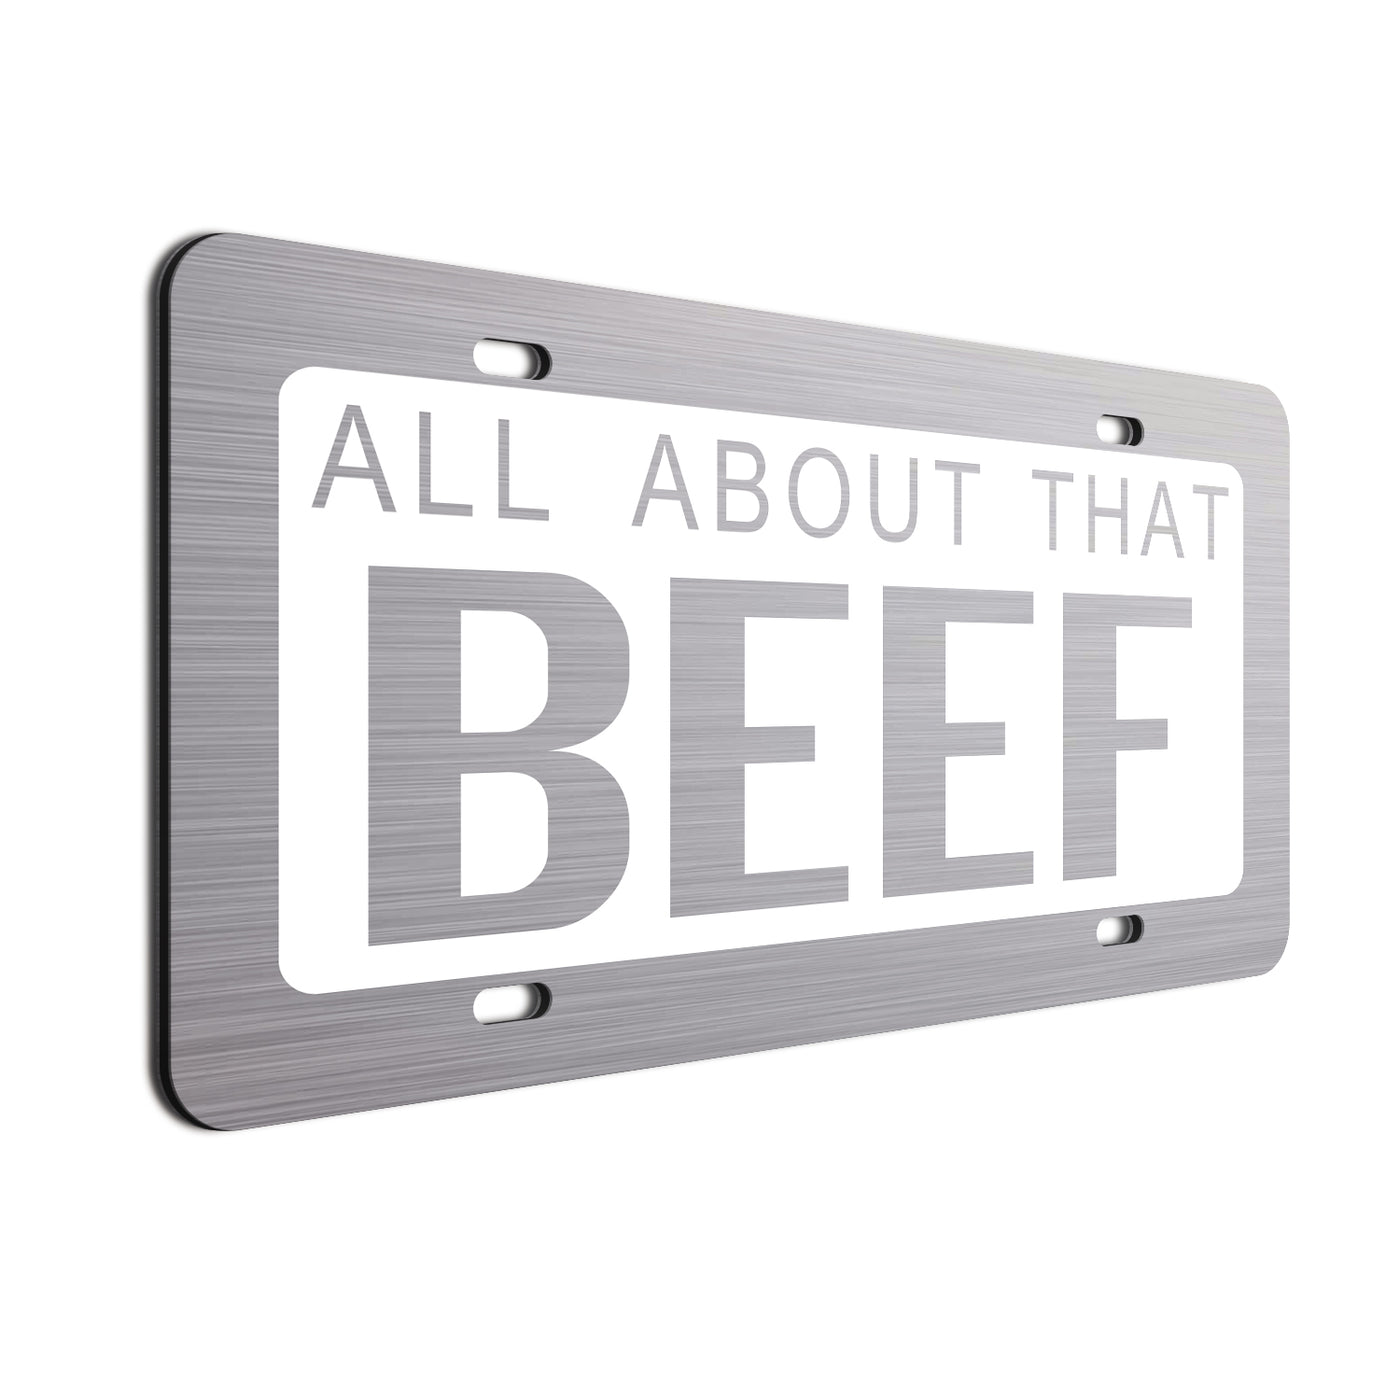 All About That Beef Car License Plate White